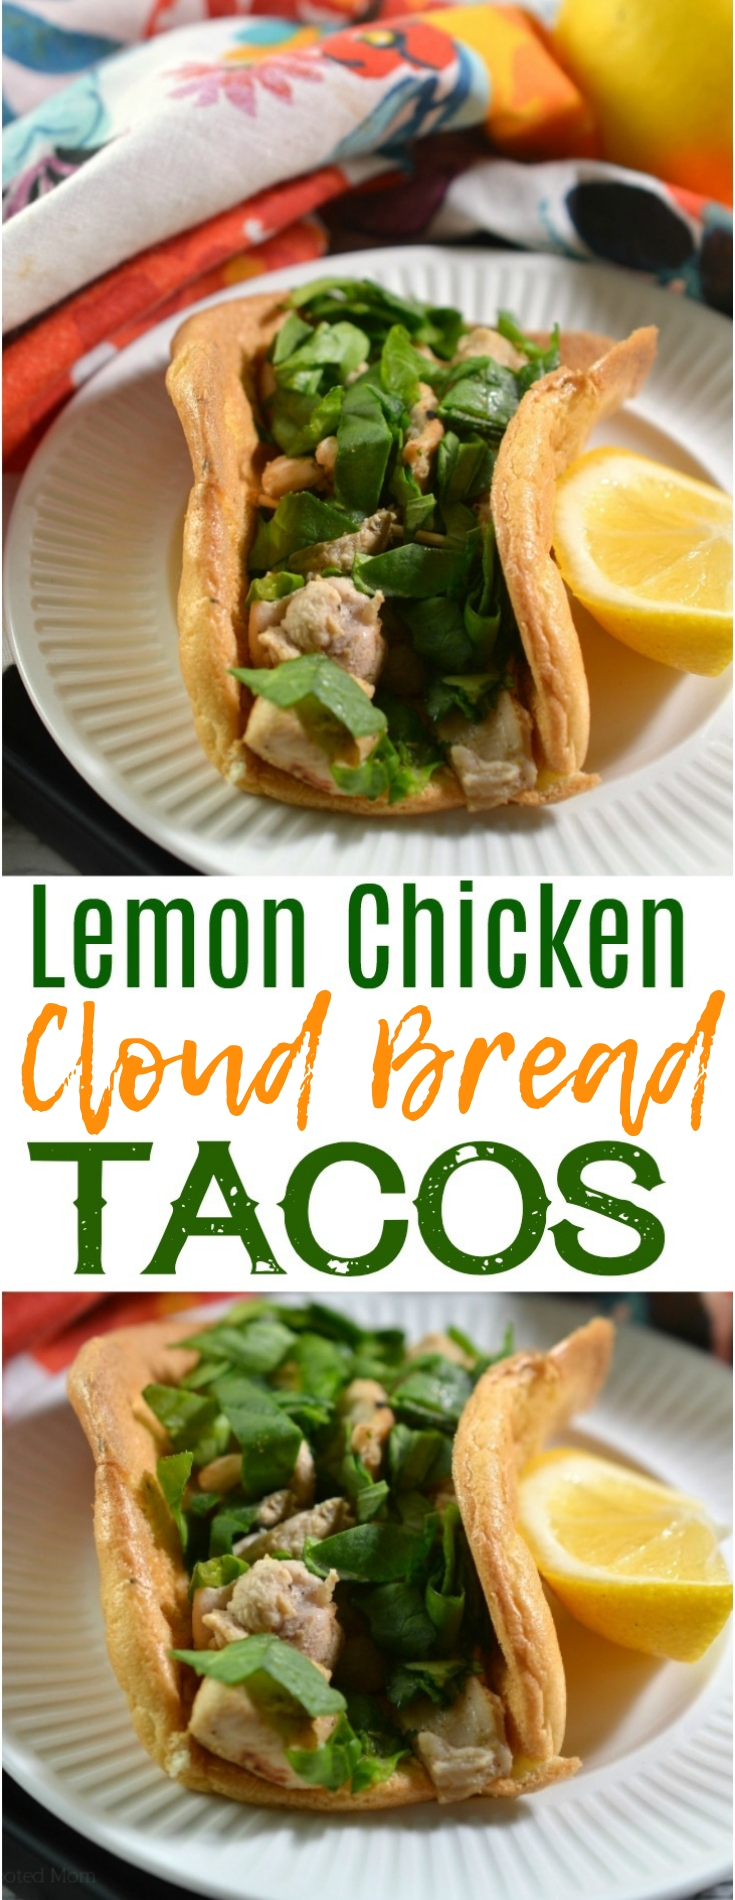 These low-carb lemon chicken cloud bread tacos are not only healthy, they are high in protein and the perfect way to blow your tastebuds!